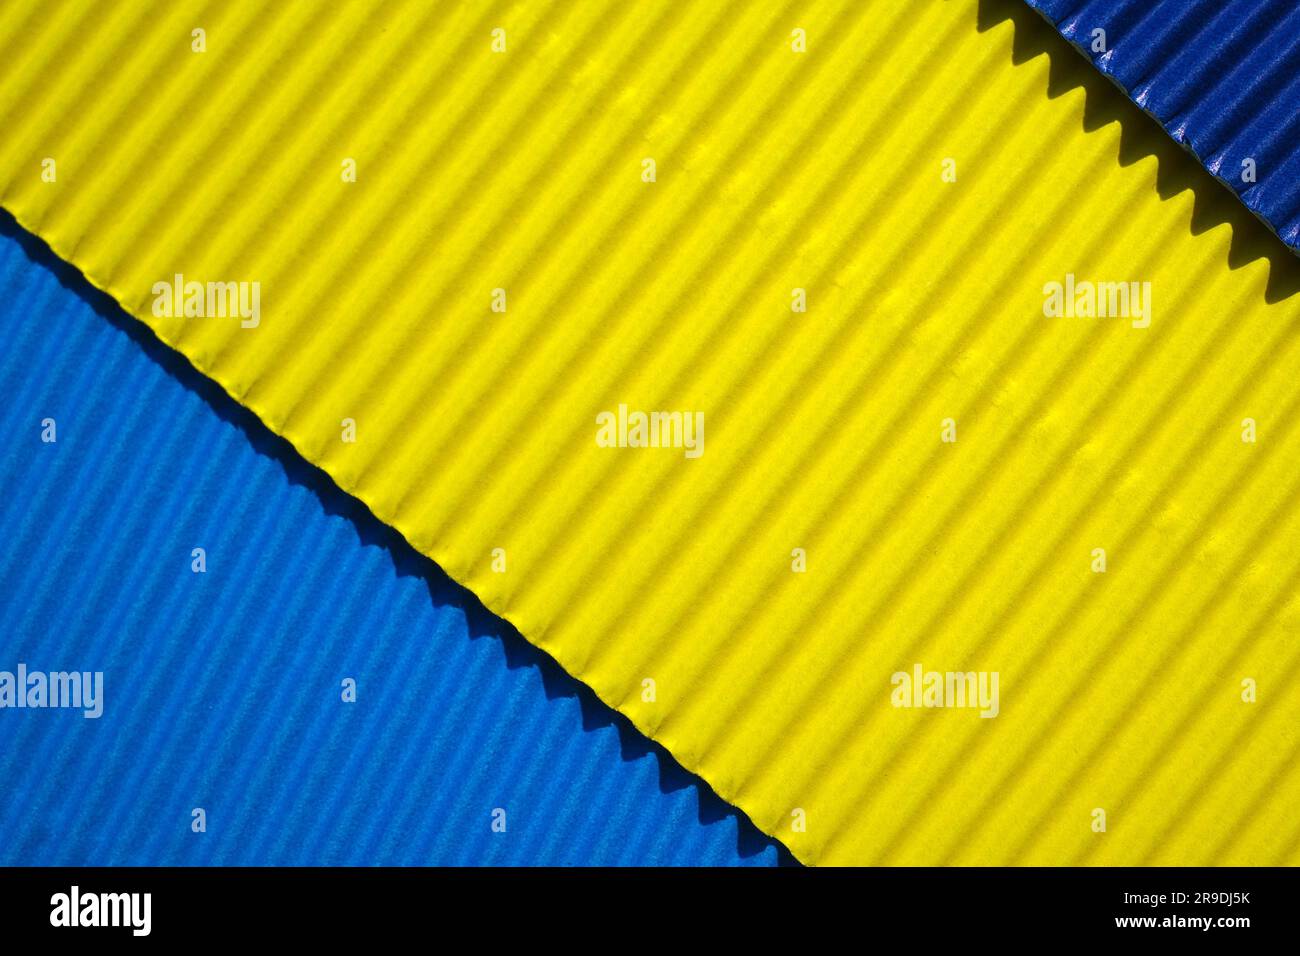 Diagonally ribbed cardboard with the colors blue, yellow, indigo. Meant as background Stock Photo